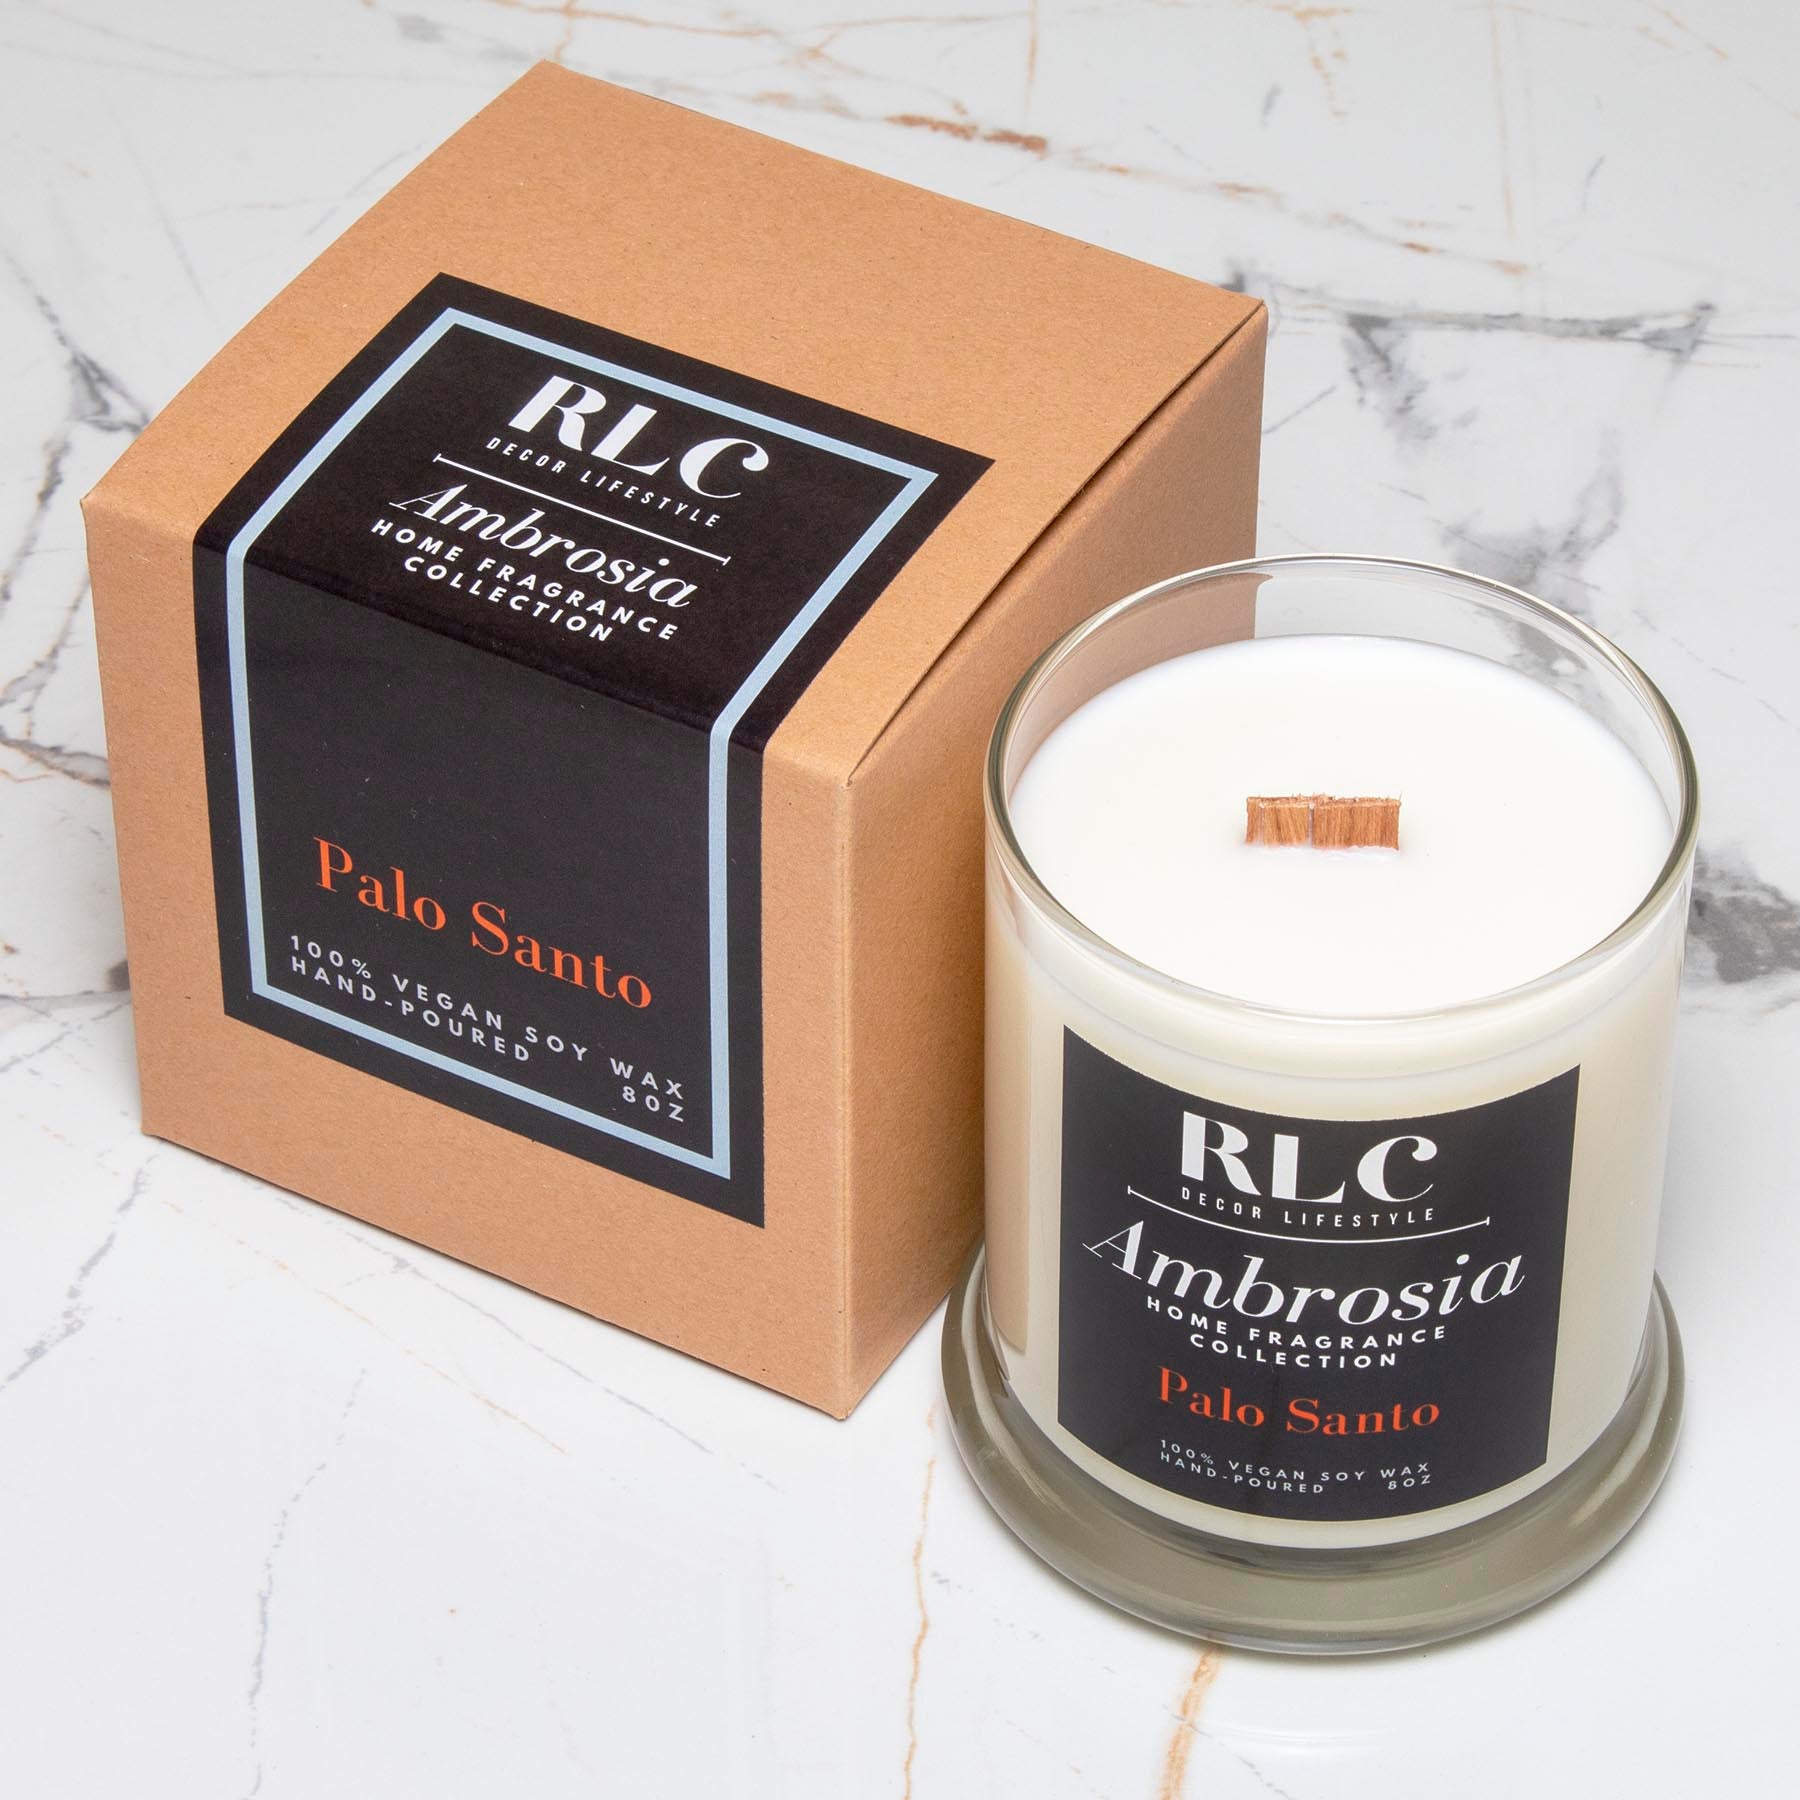 RLC Decor Lifestyle - Ambrosia Collection - Vegan Soy Palo Santo Candle - A Chicago-based lifestyle brand. We provide 100% Handpoured Vegan Soy Candles for home & small office, travel candles, home decor, and jewelry. 